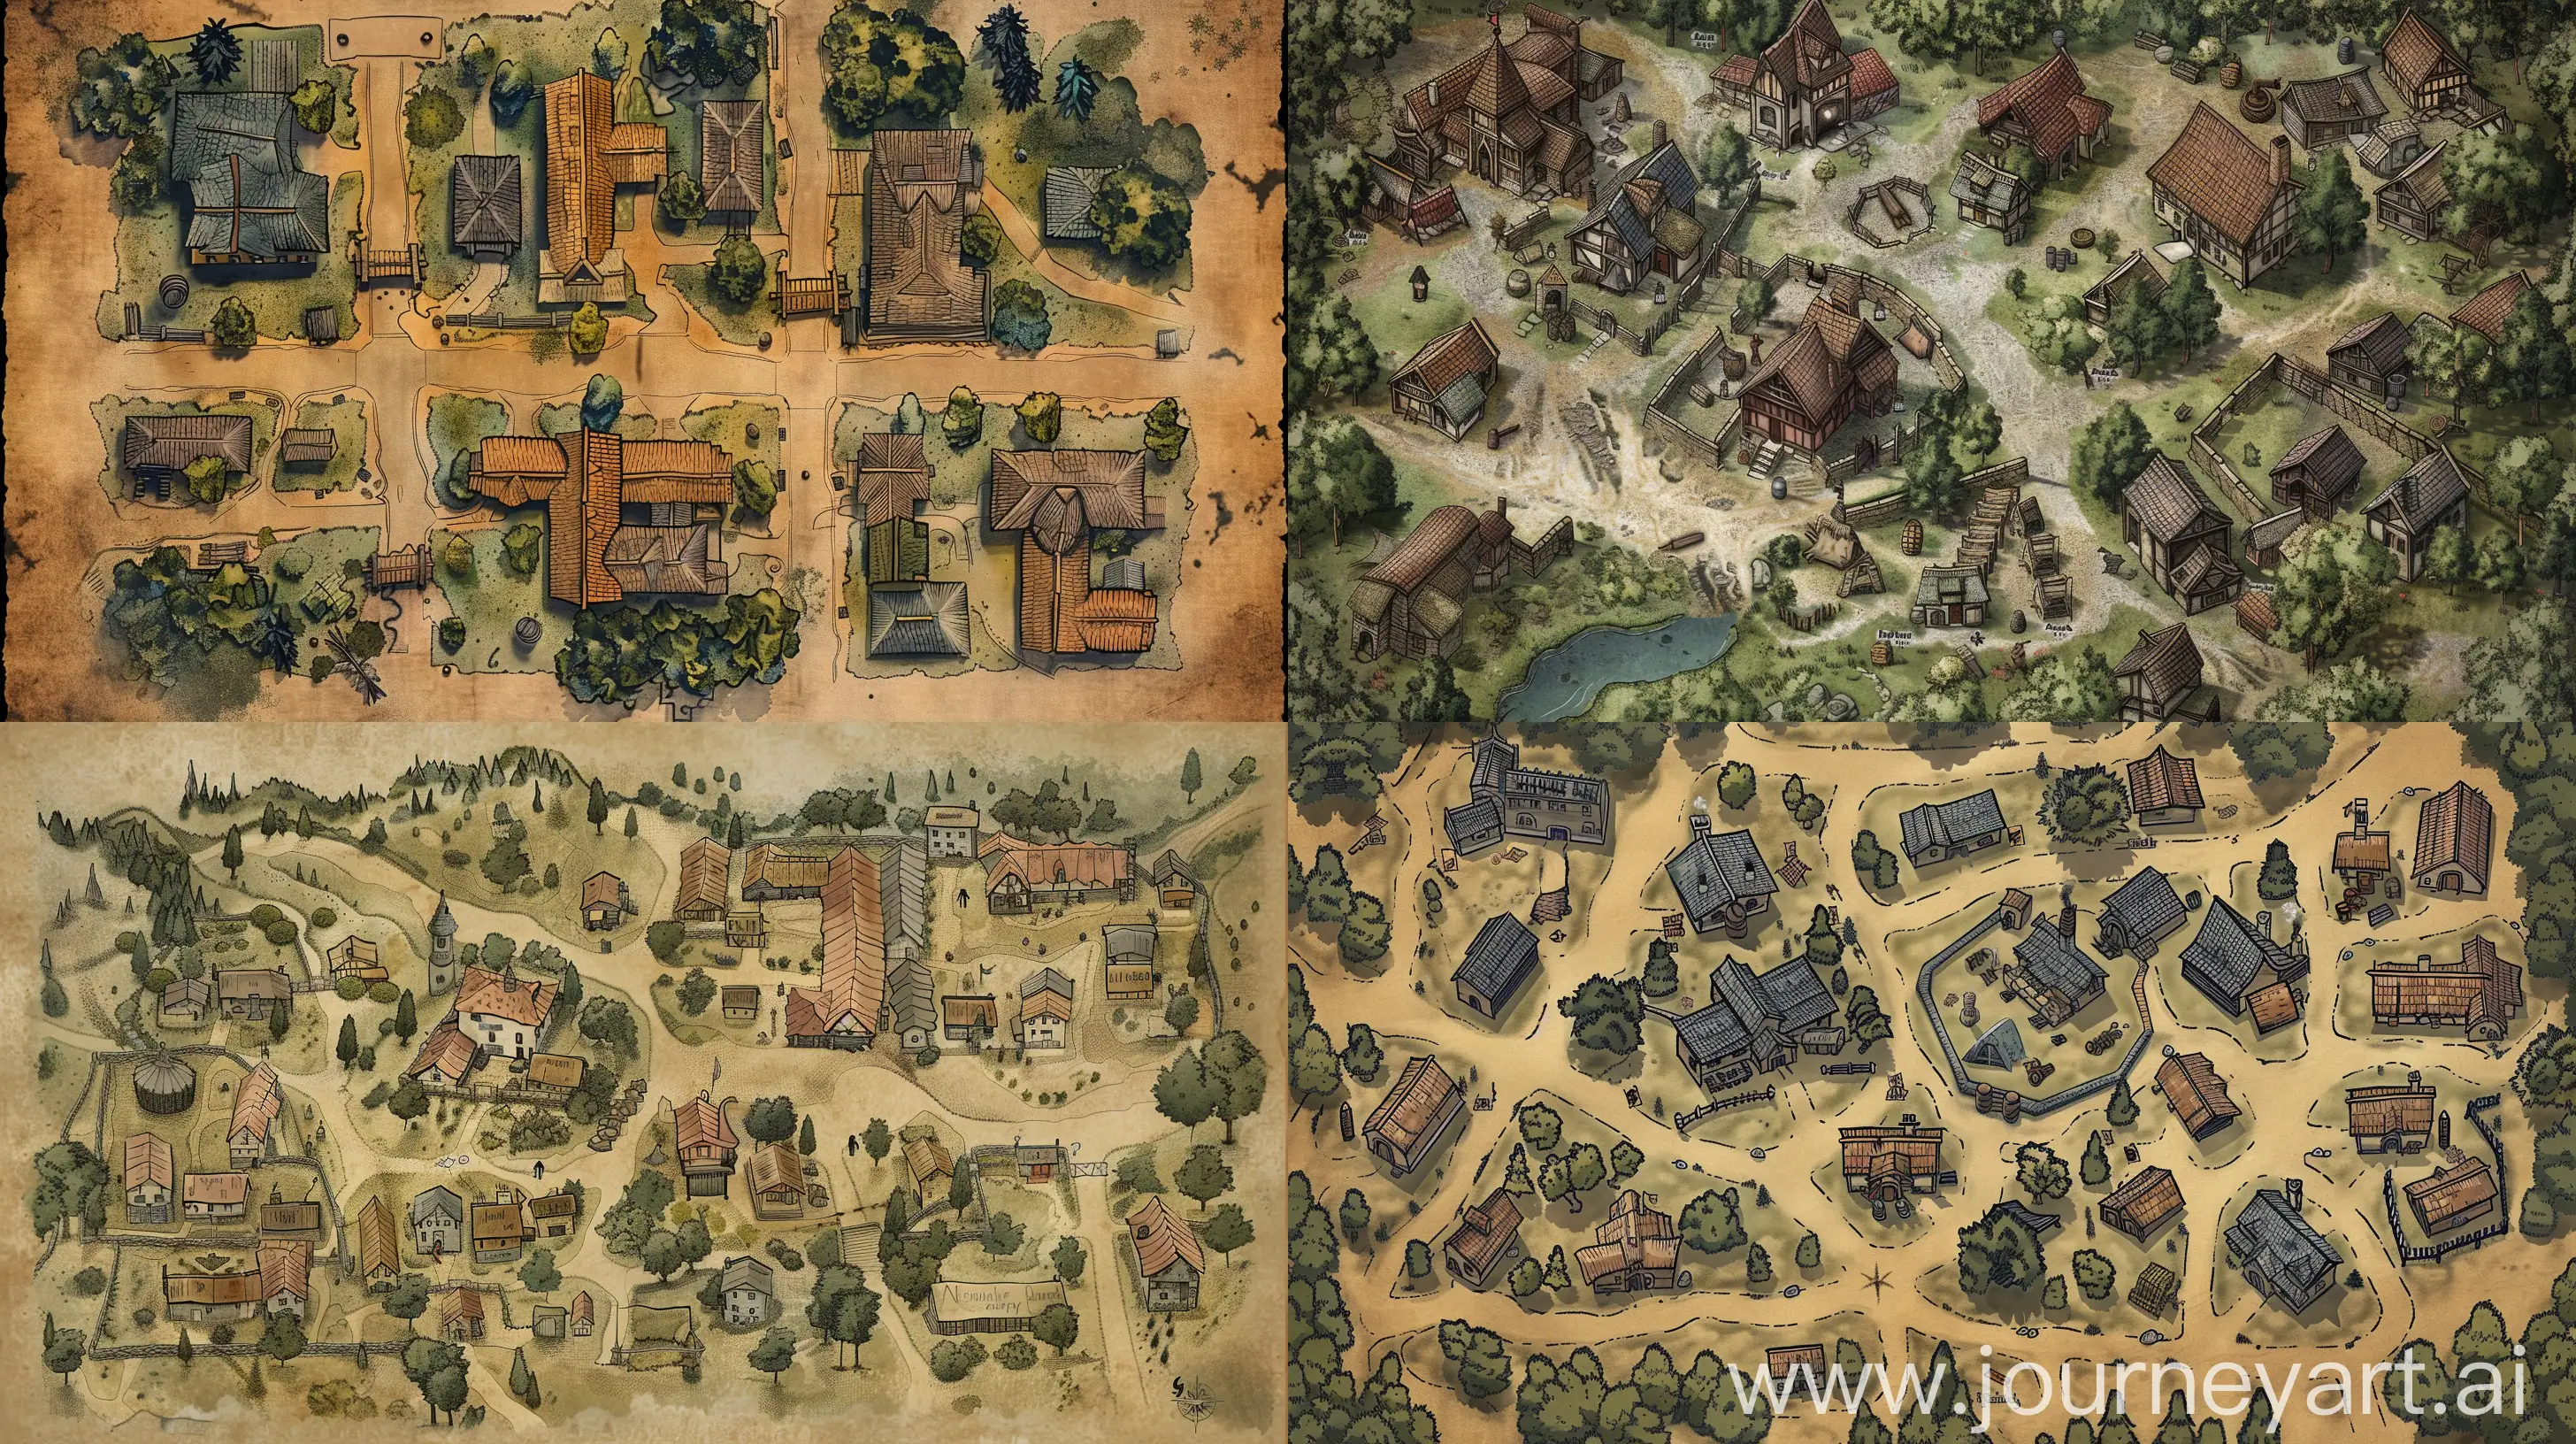 a map of the small village for playing D&D:: blueprint::1 ancient::1 caravaggio::1 rembrandt::1 gray::2 cardboard::3 --v 6 --ar 16:9